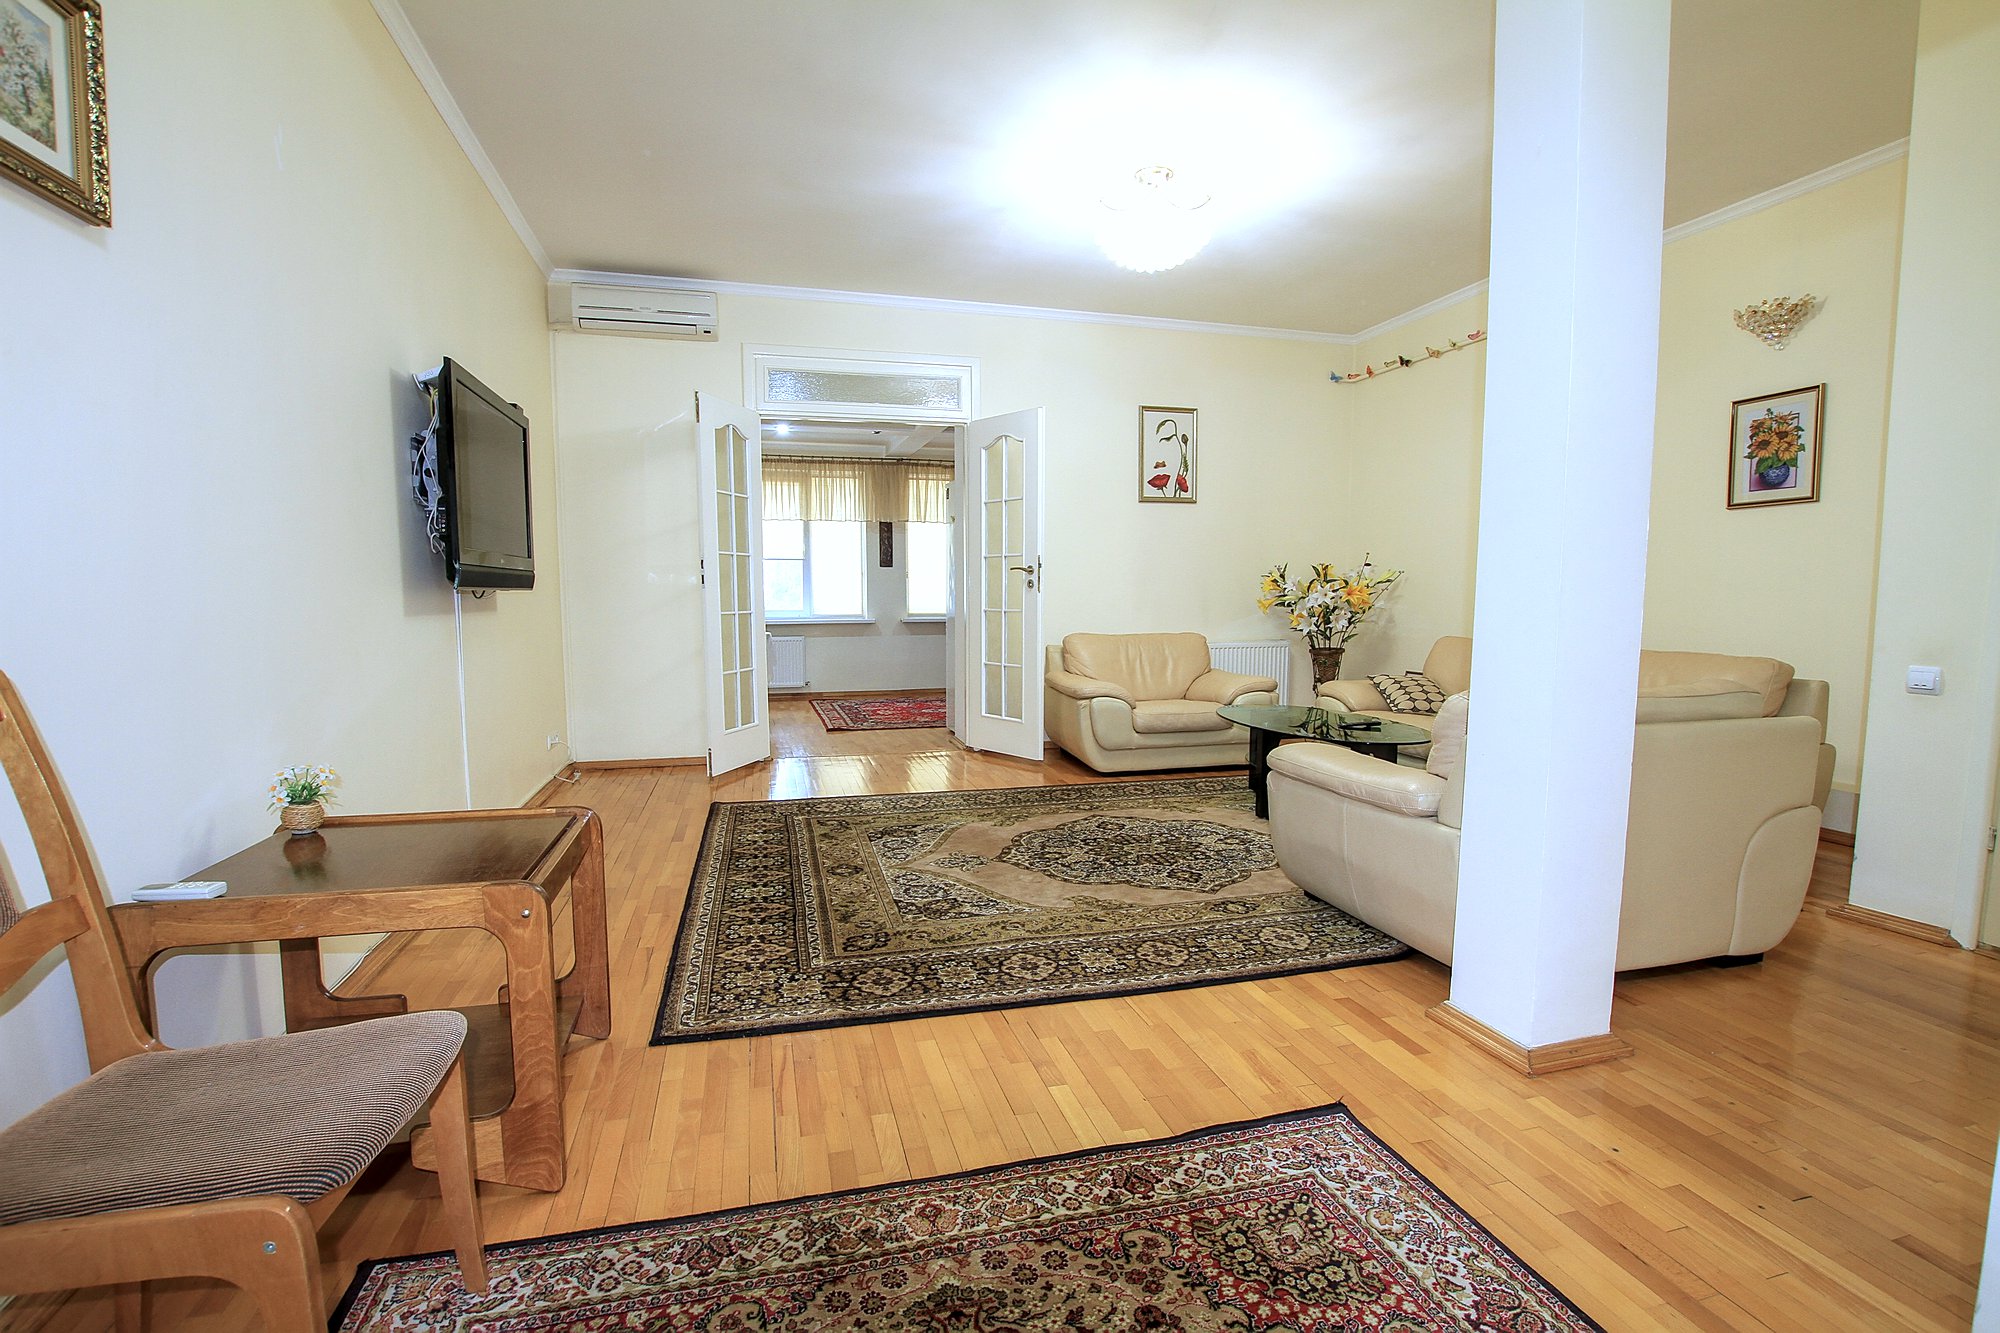 Chisinau Central park apartment for rent: 3 rooms, 2 bedrooms, 87 m²